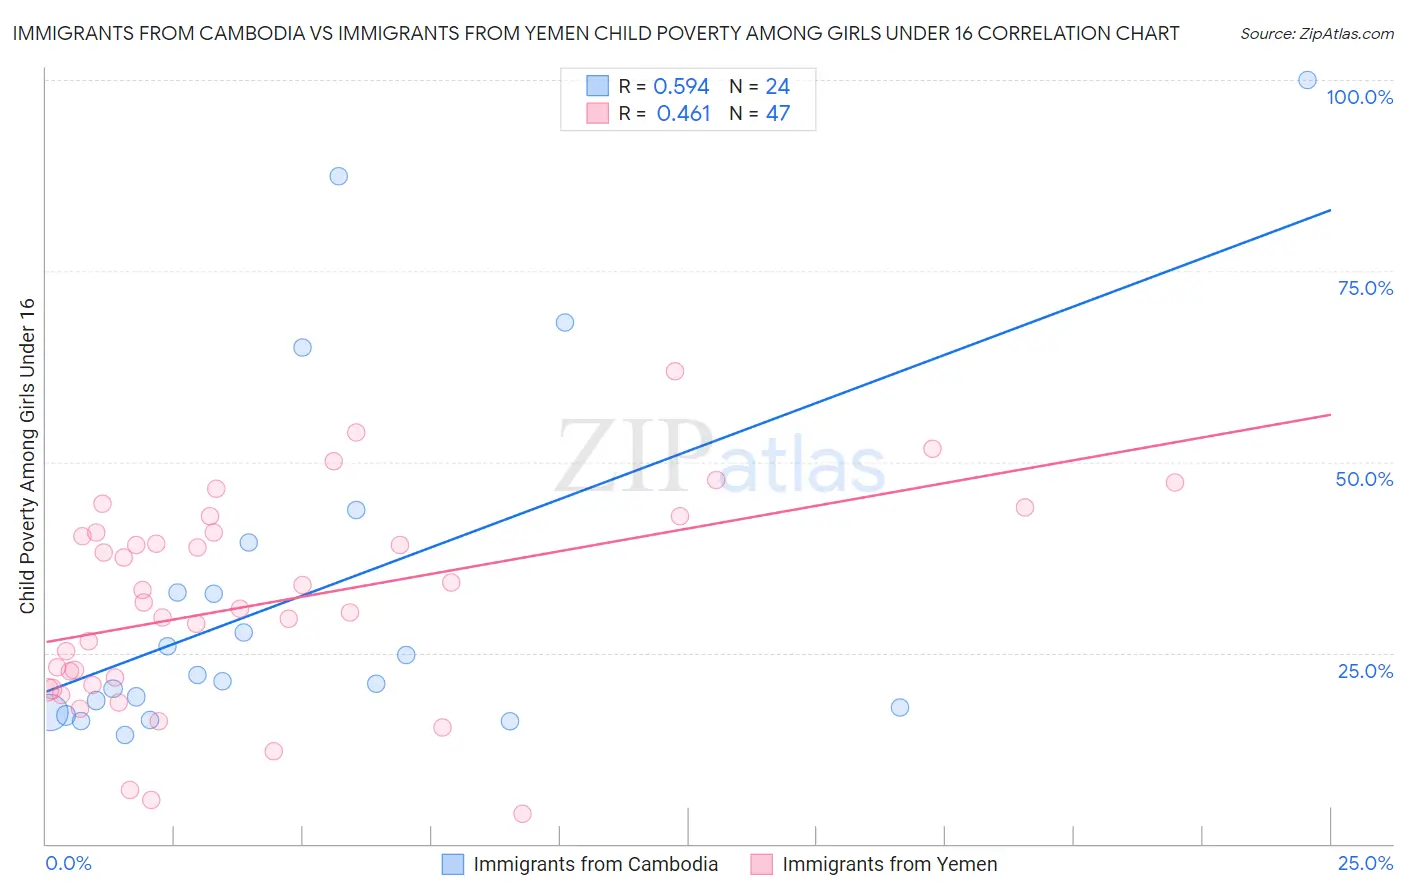 Immigrants from Cambodia vs Immigrants from Yemen Child Poverty Among Girls Under 16